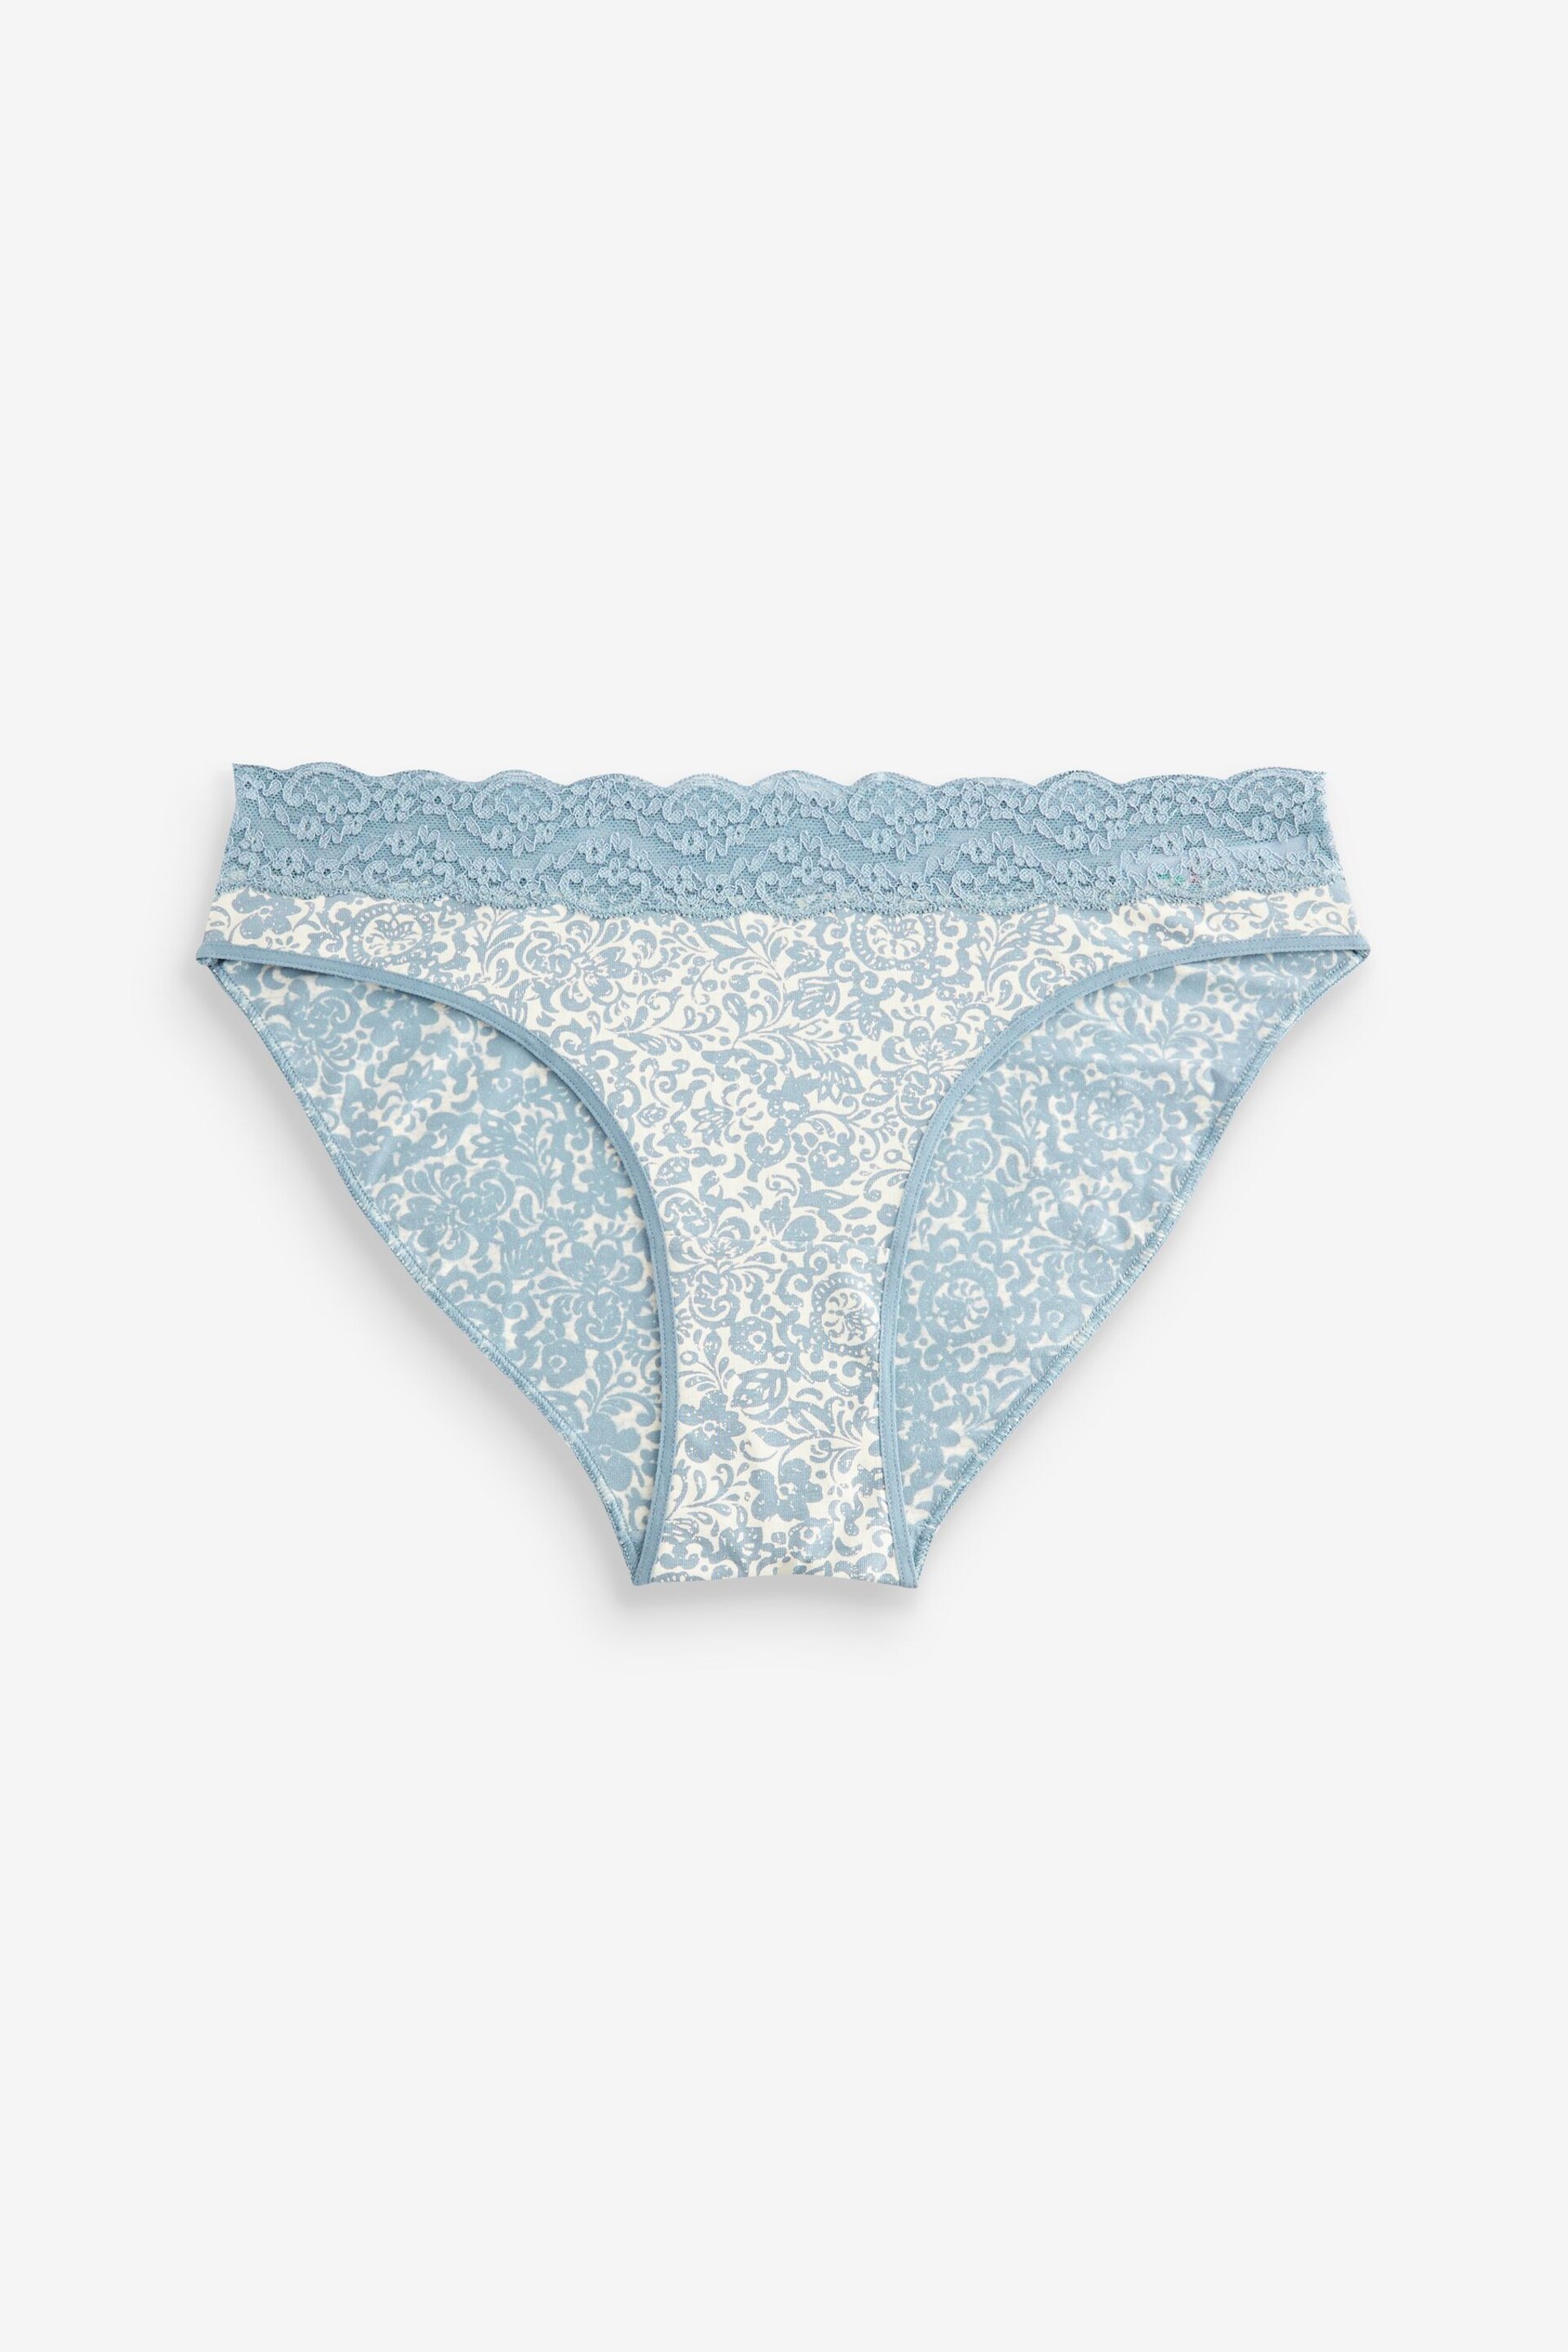 Cream/Blue Printed High Leg Cotton and Lace Knickers 4 Pack - Image 5 of 9